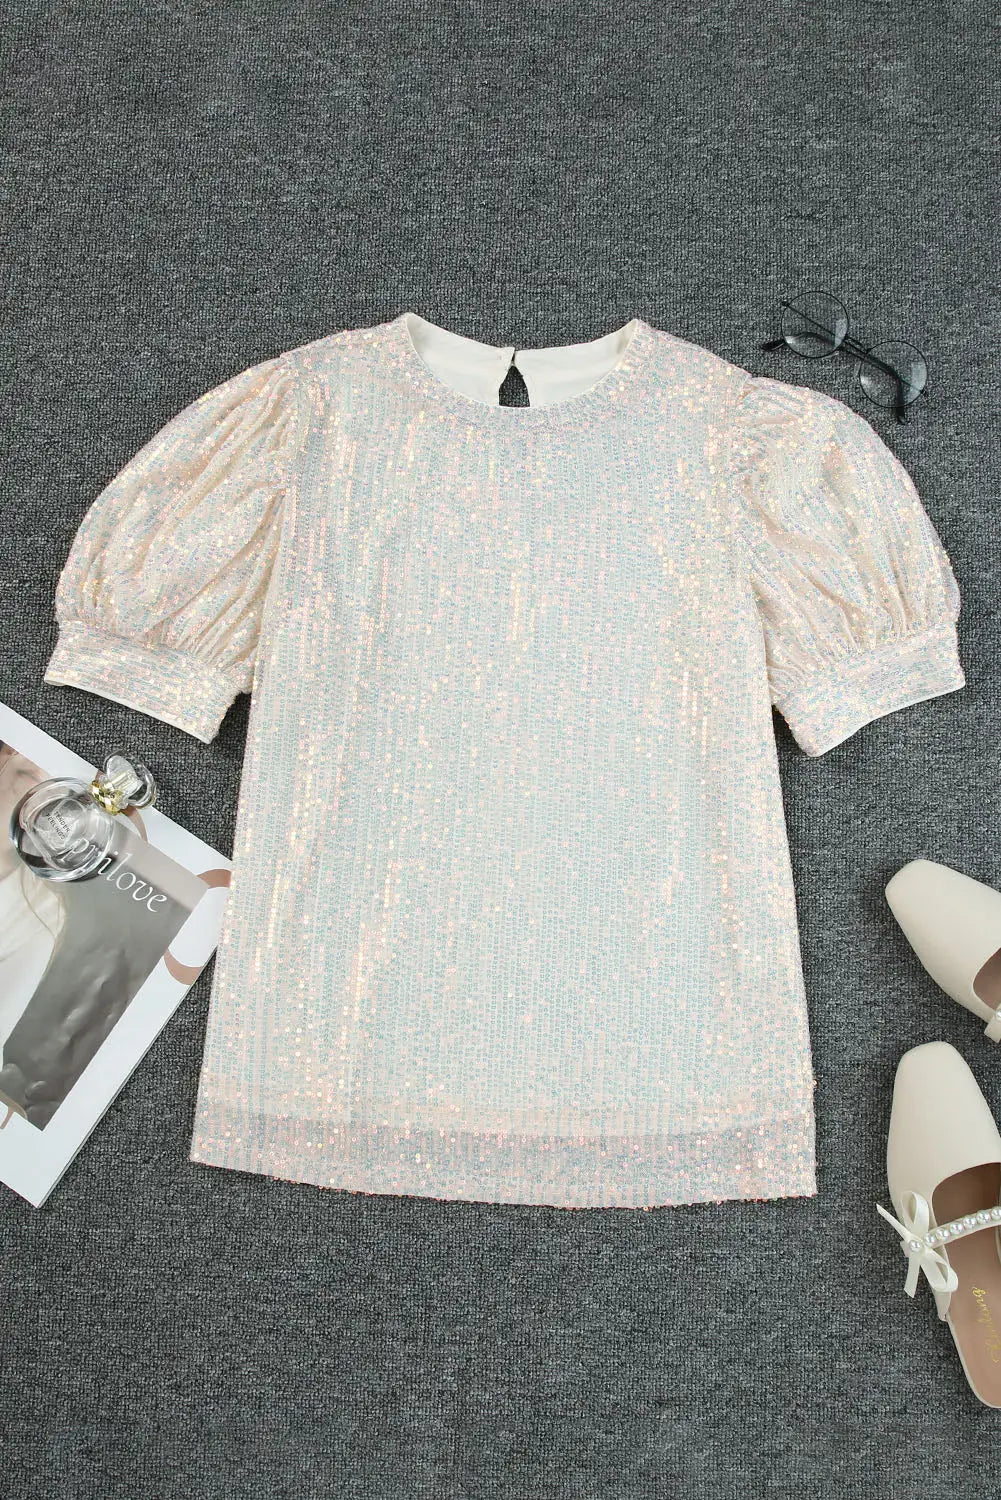 Apricot sequin puff sleeve top - tops